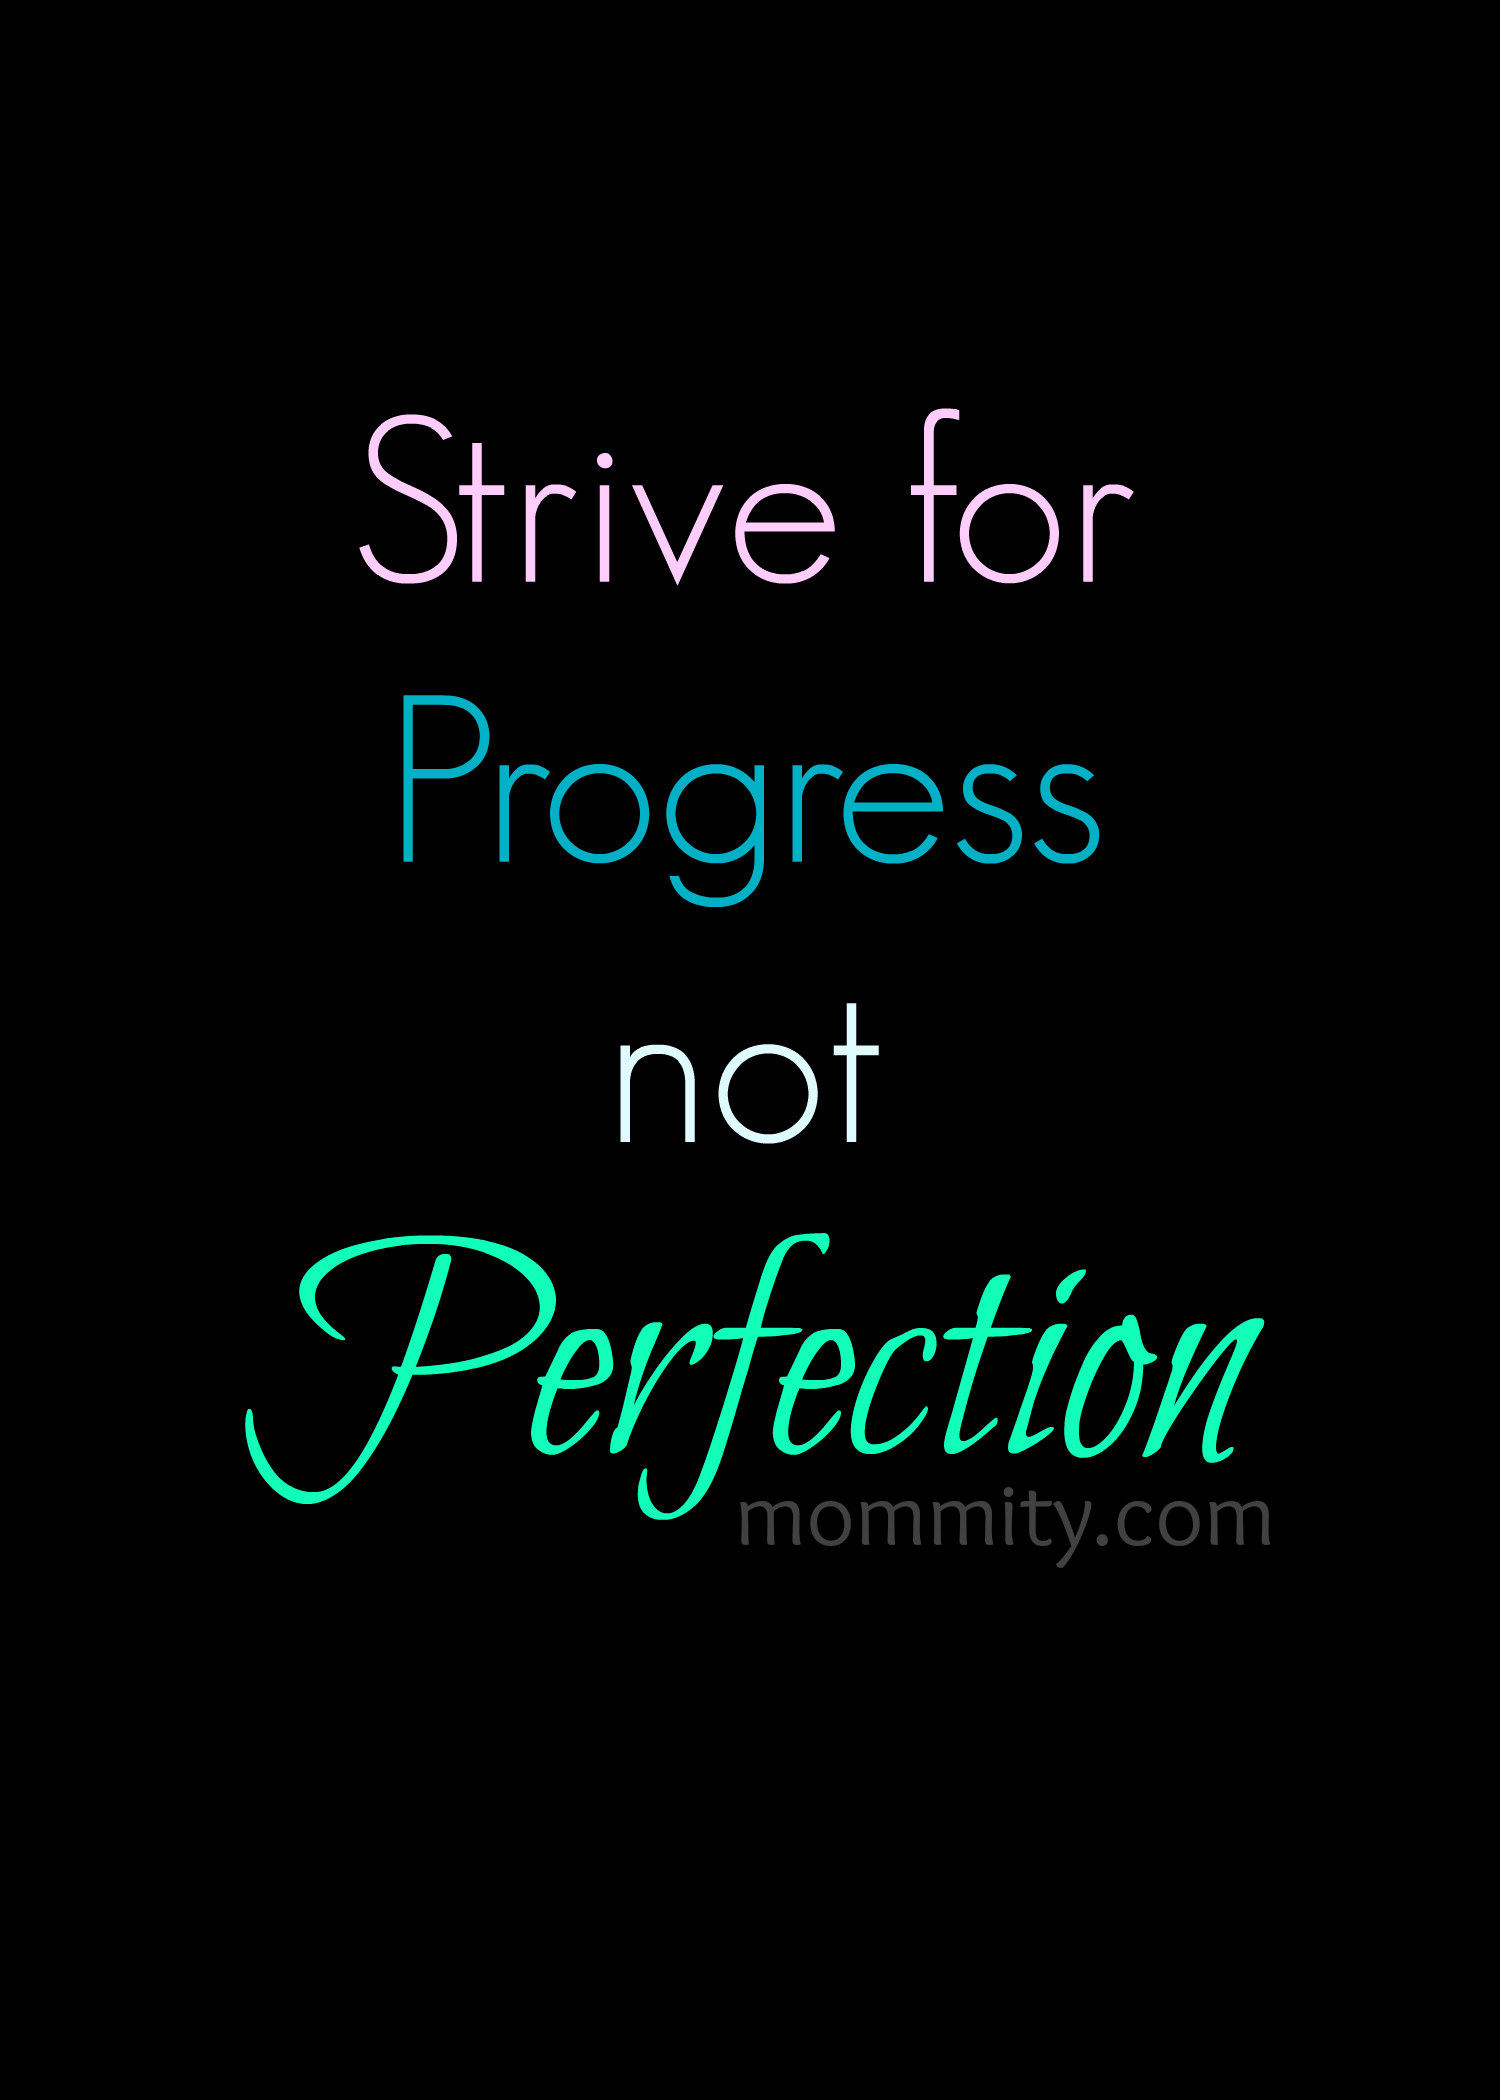 Strive for Progress not Perfection - Fitness Motivation Quotes